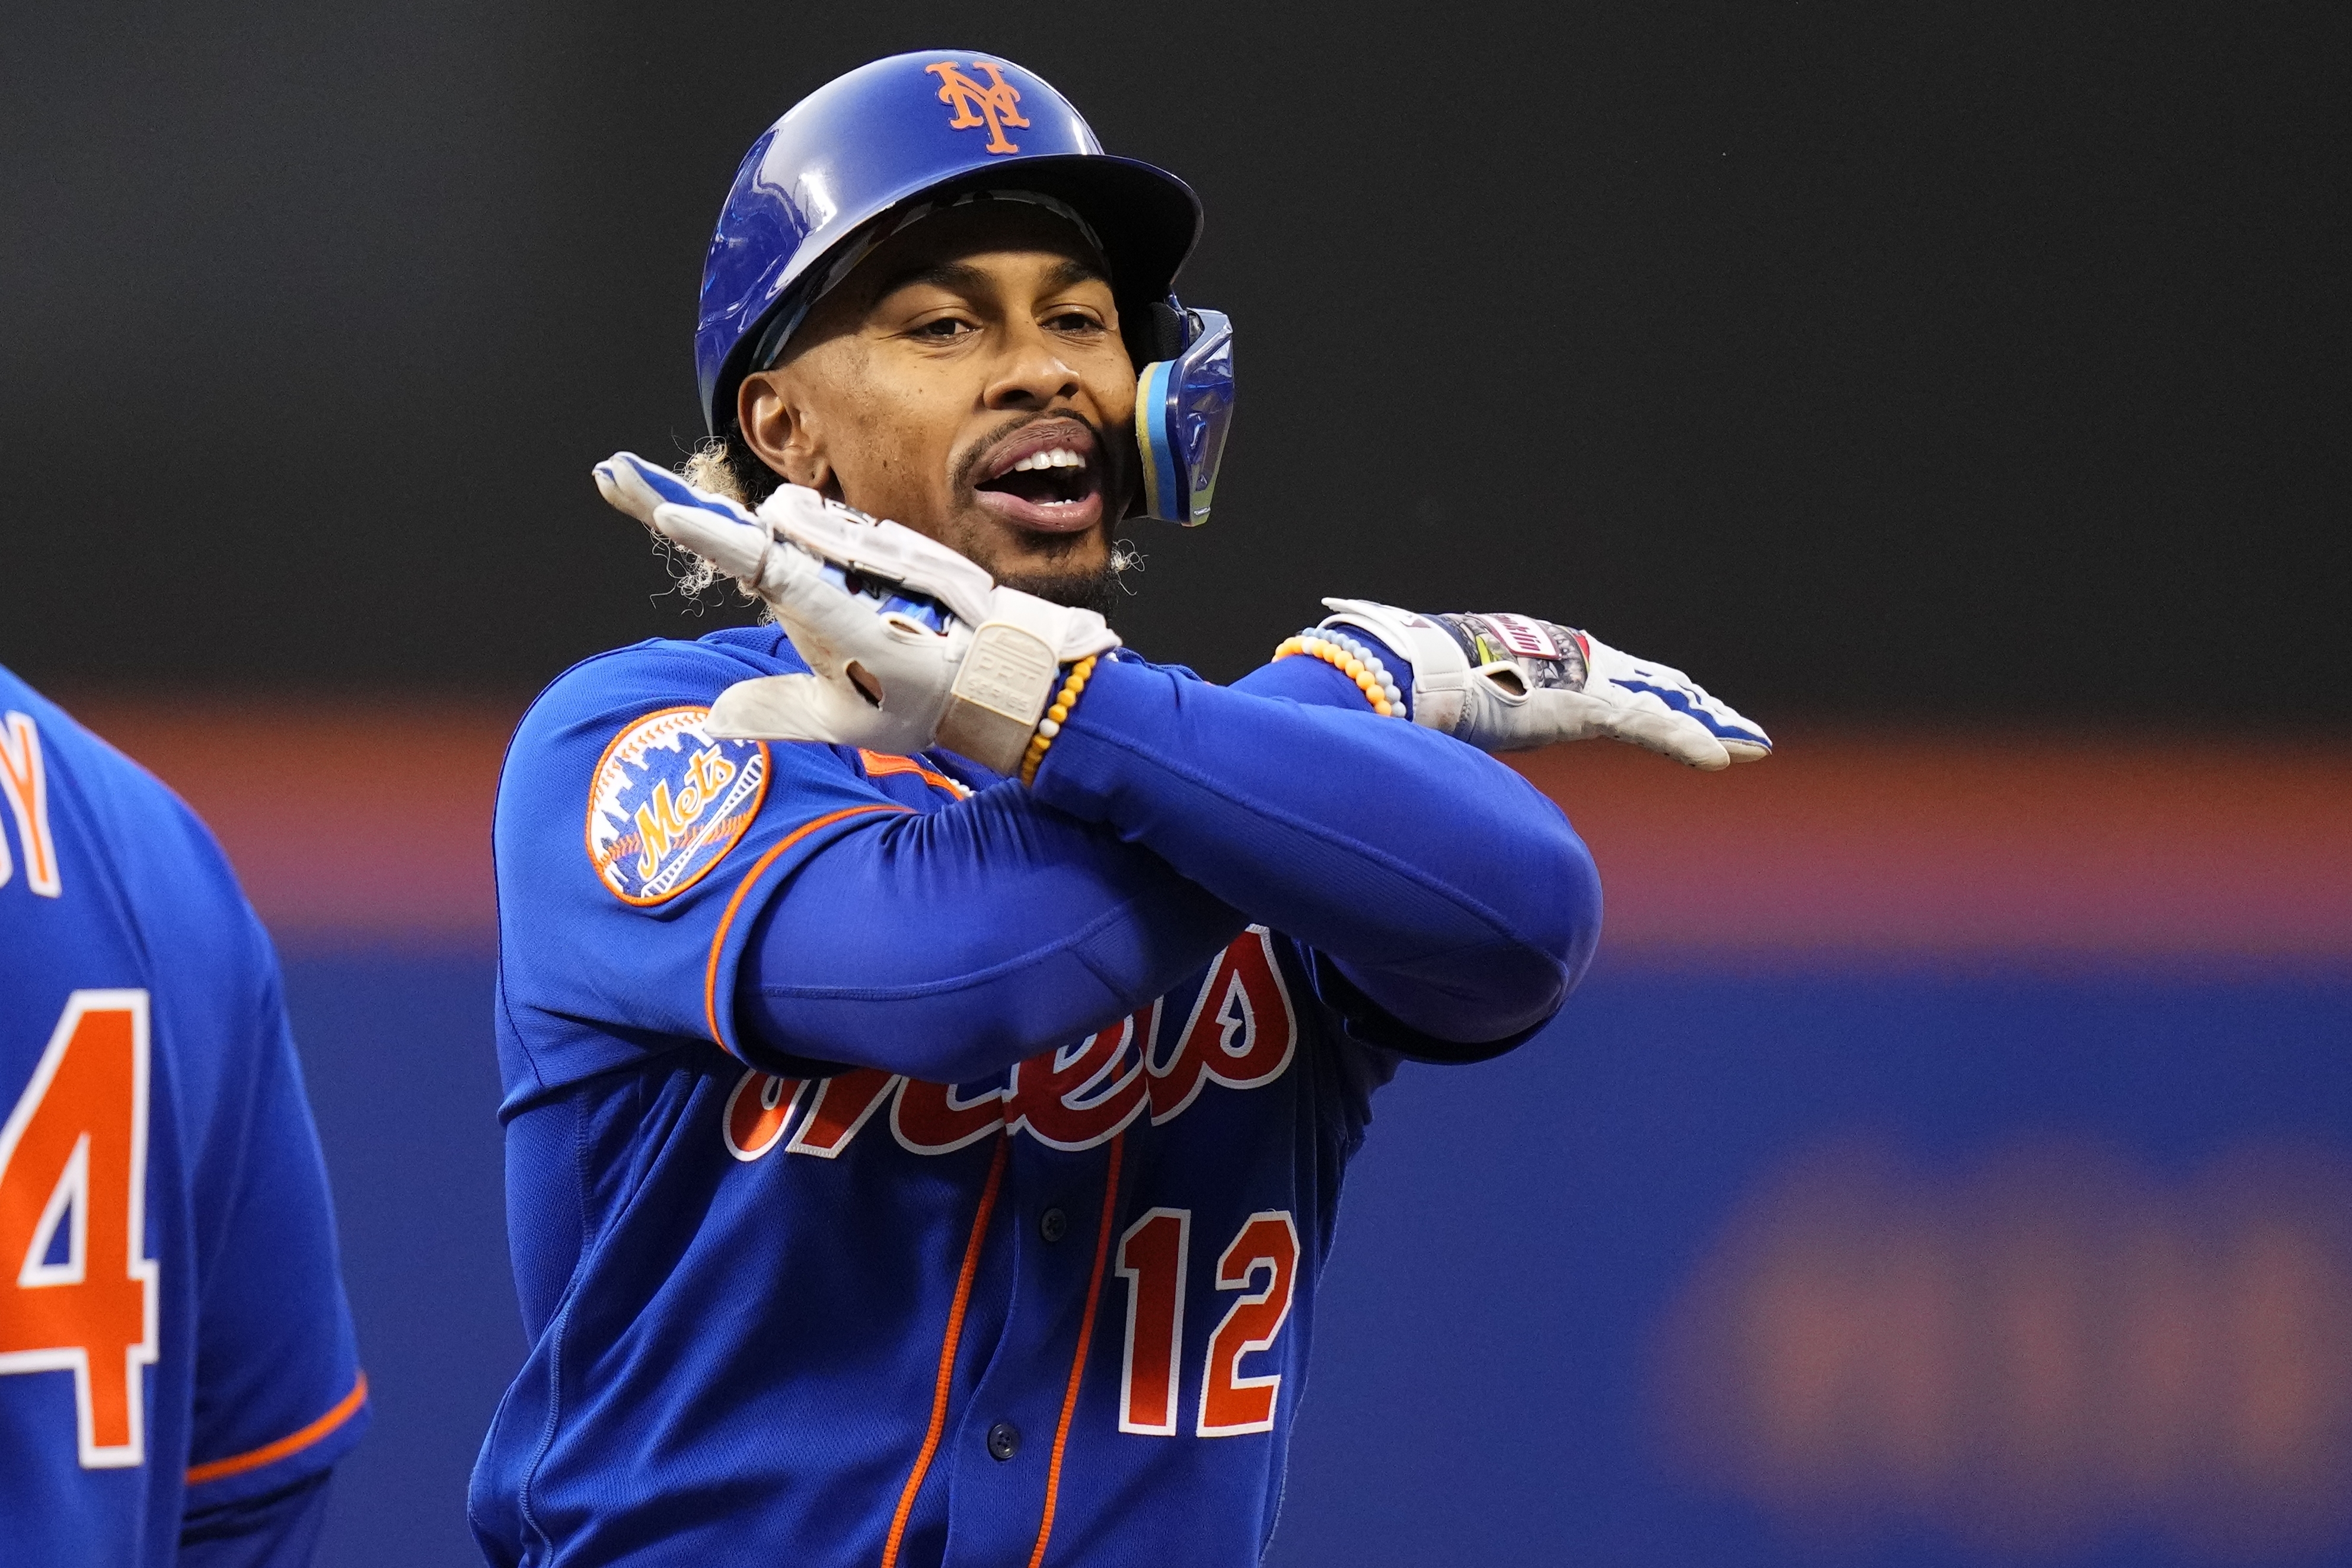 Francisco Lindor is back with the Mets and 'ready to play' after